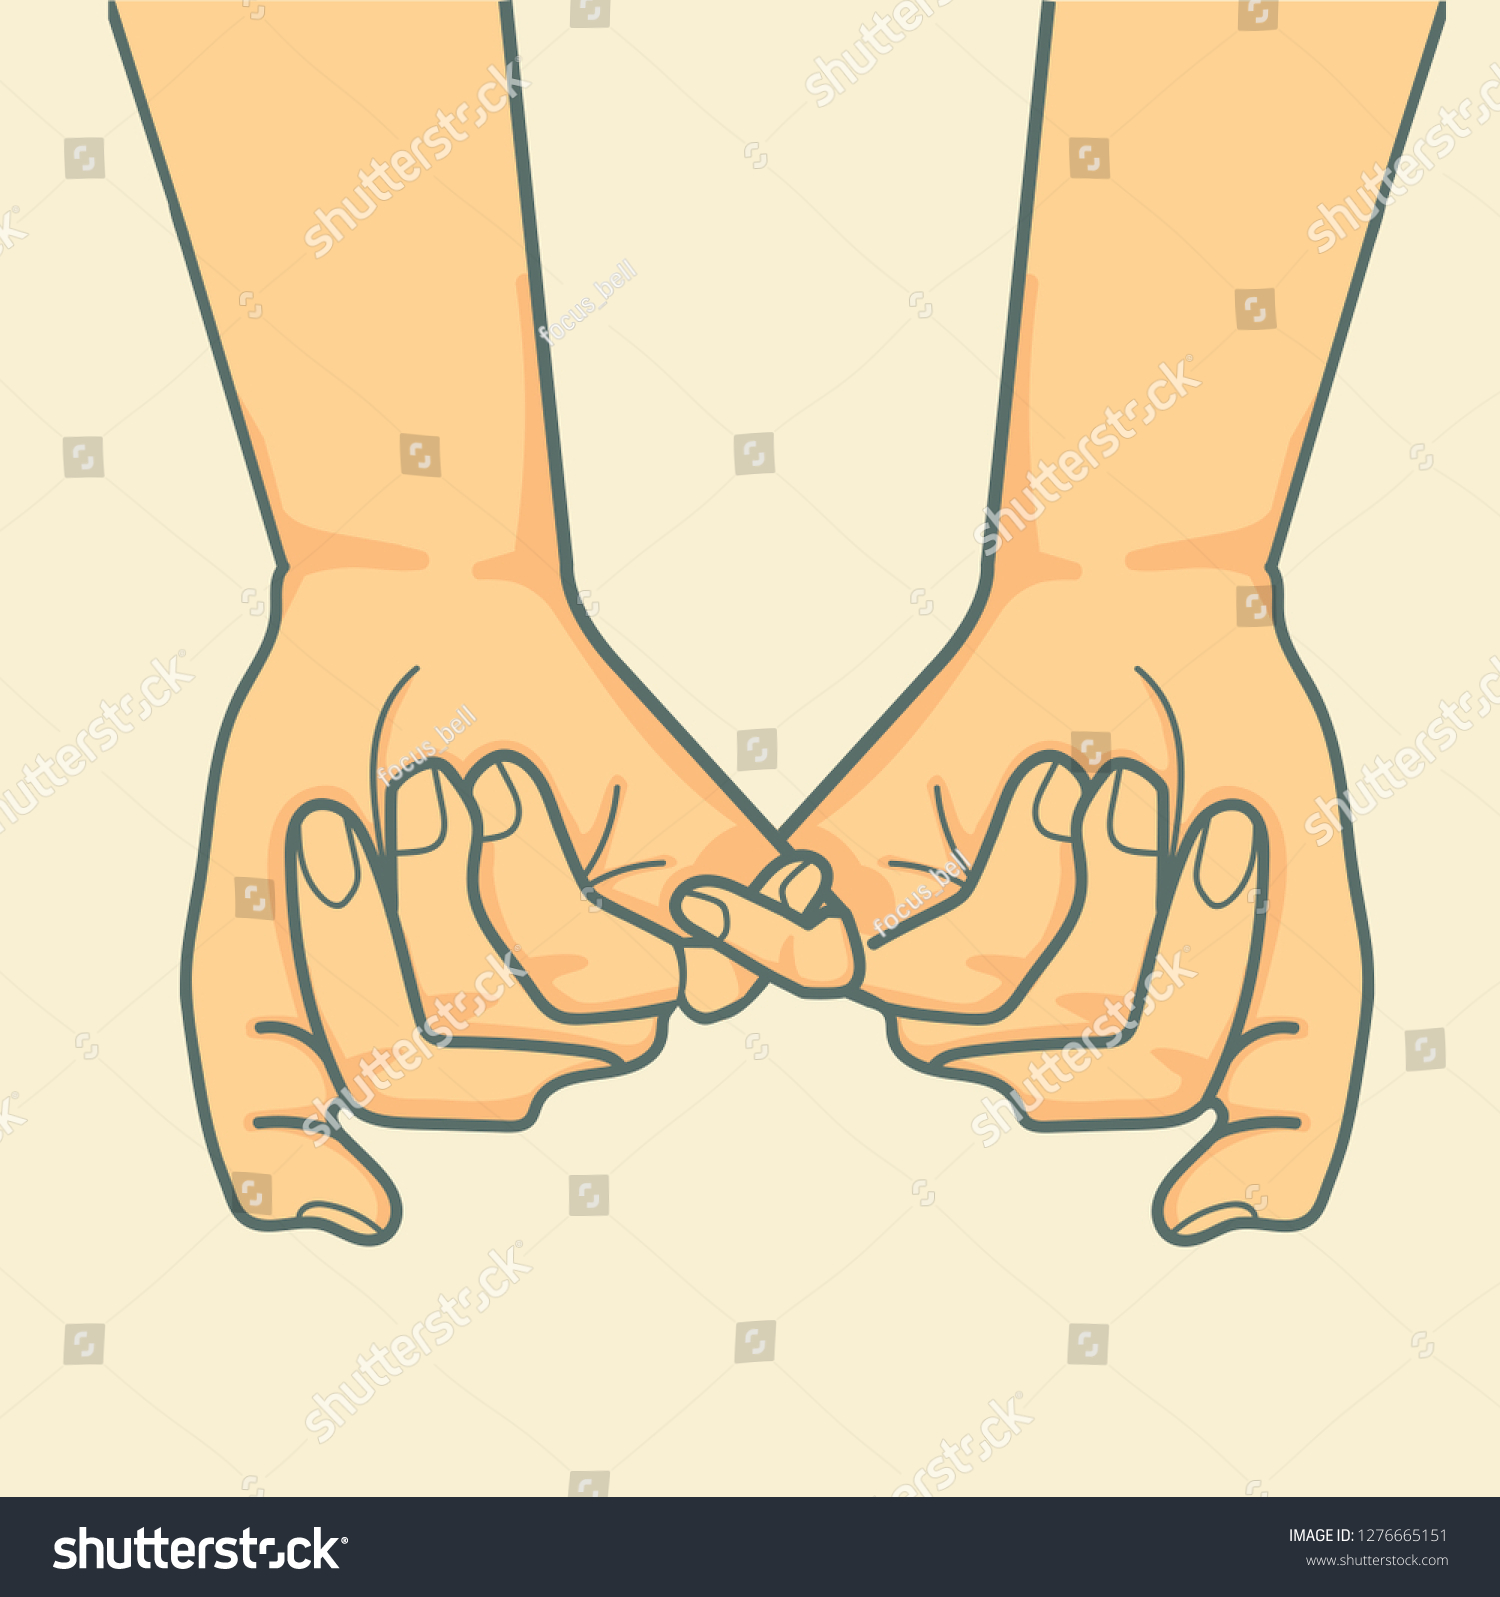 Hand Holding Pinky Promise Concept Stock Vector Royalty Free 1276665151 Shutterstock 